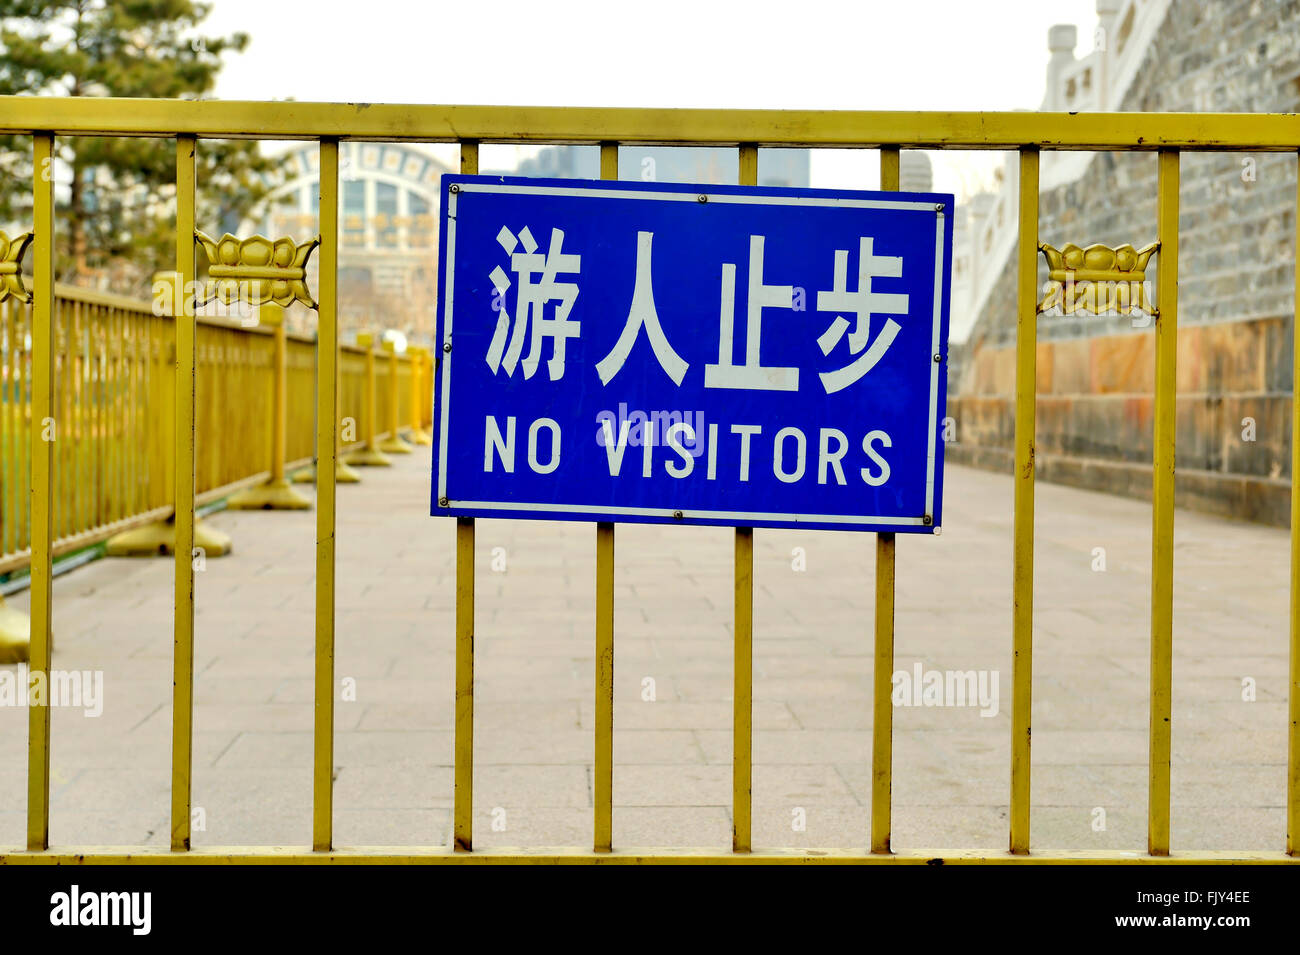 Sign in China with text in Chinese and English.The text means 'No visitors' Stock Photo